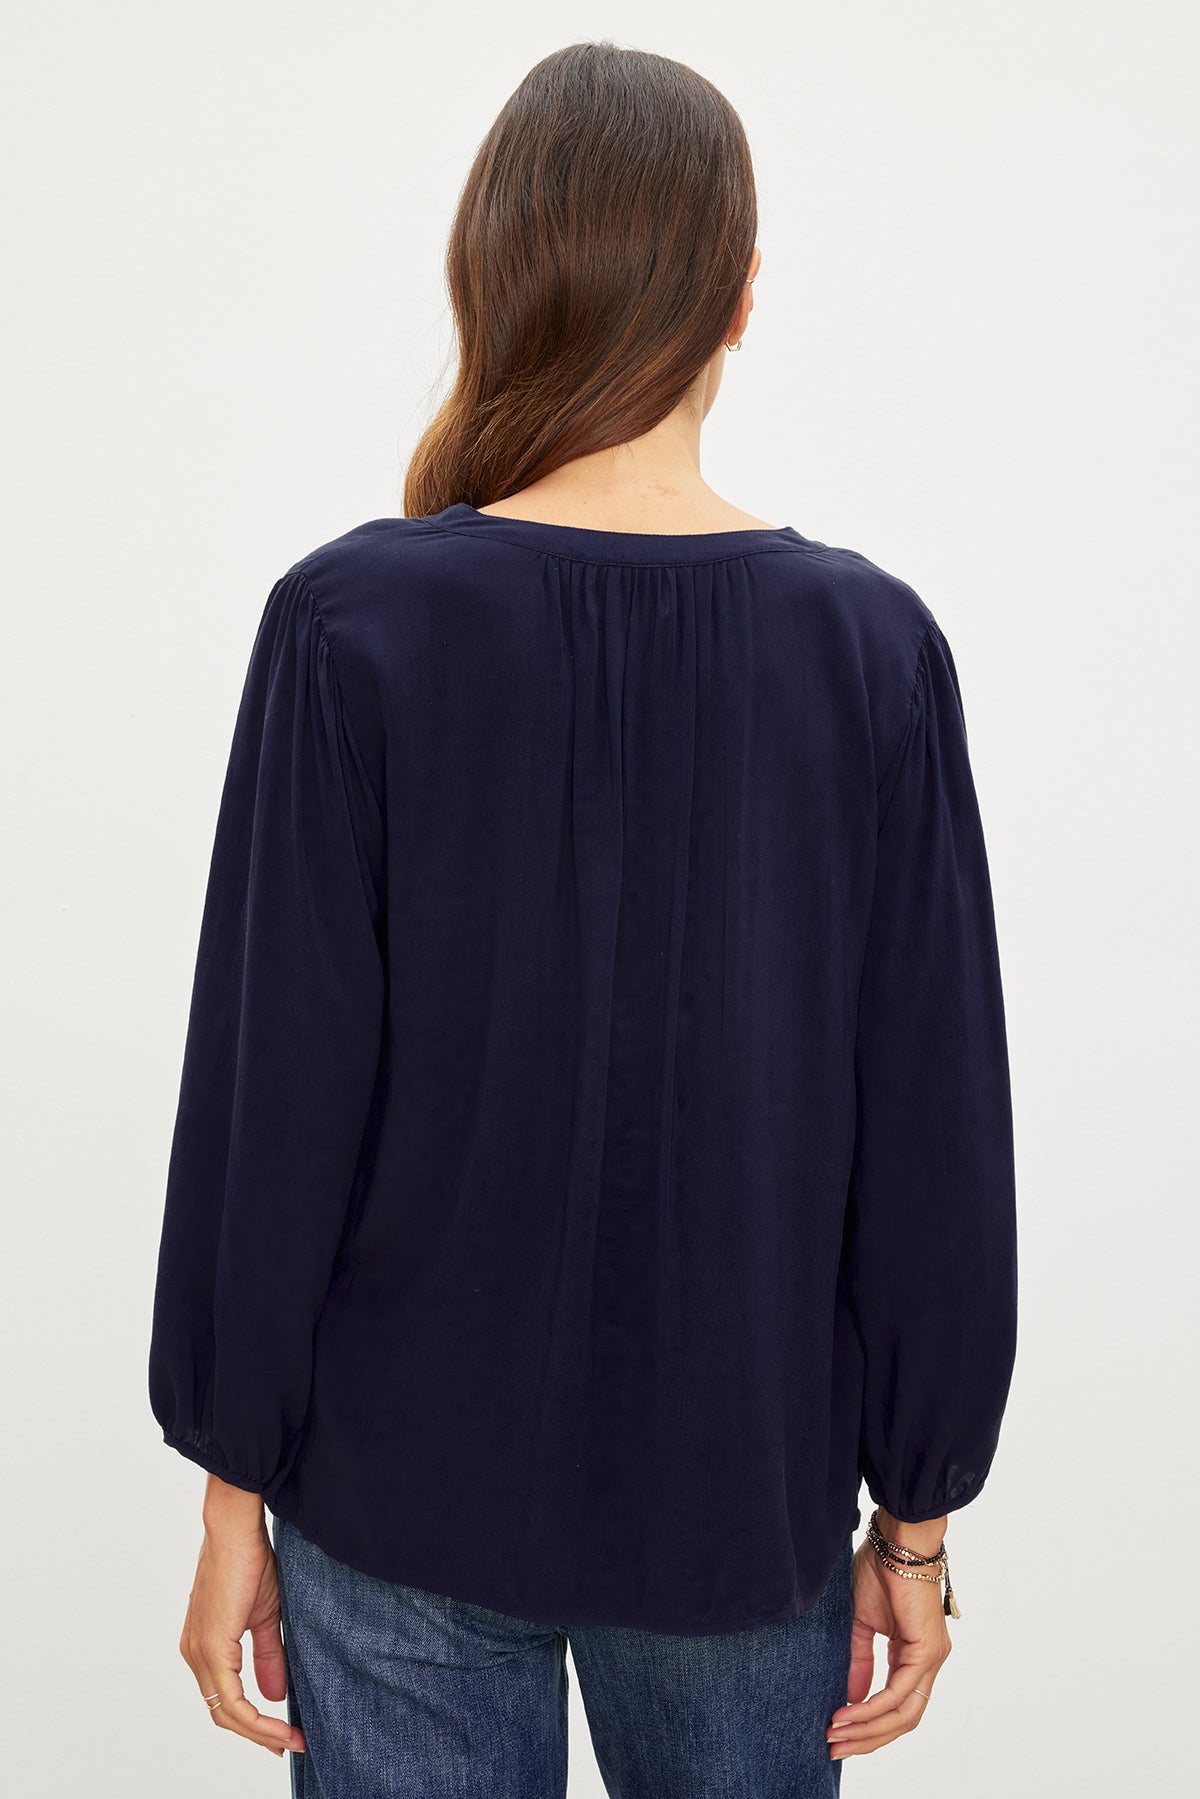 The back view of a woman wearing relaxed fit jeans and a Velvet by Graham & Spencer ASHLEY V-NECK TOP.-35955417120961